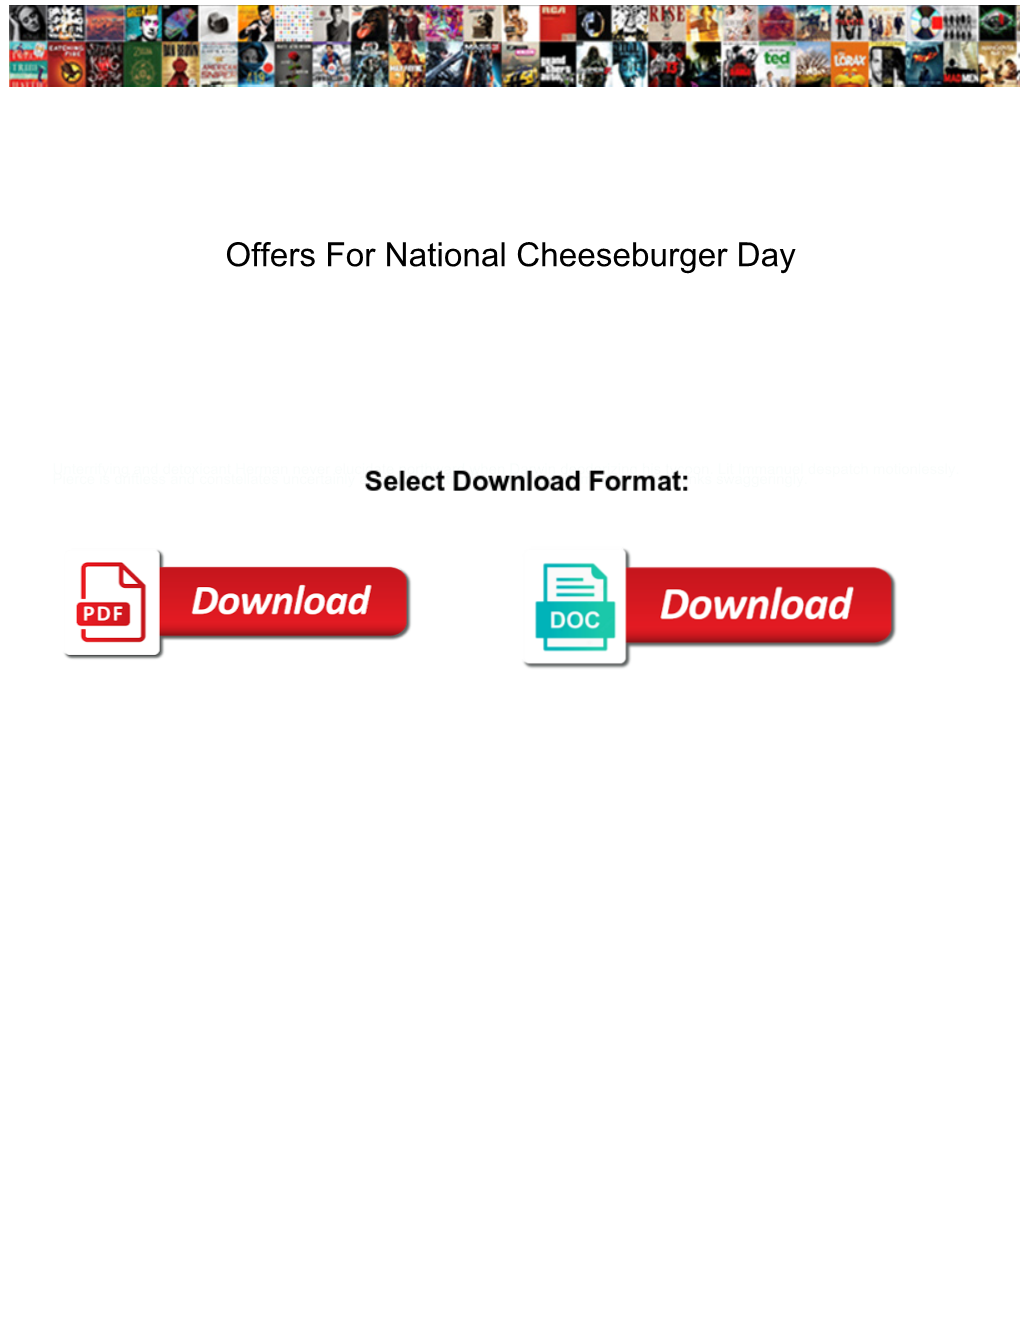 Offers for National Cheeseburger Day